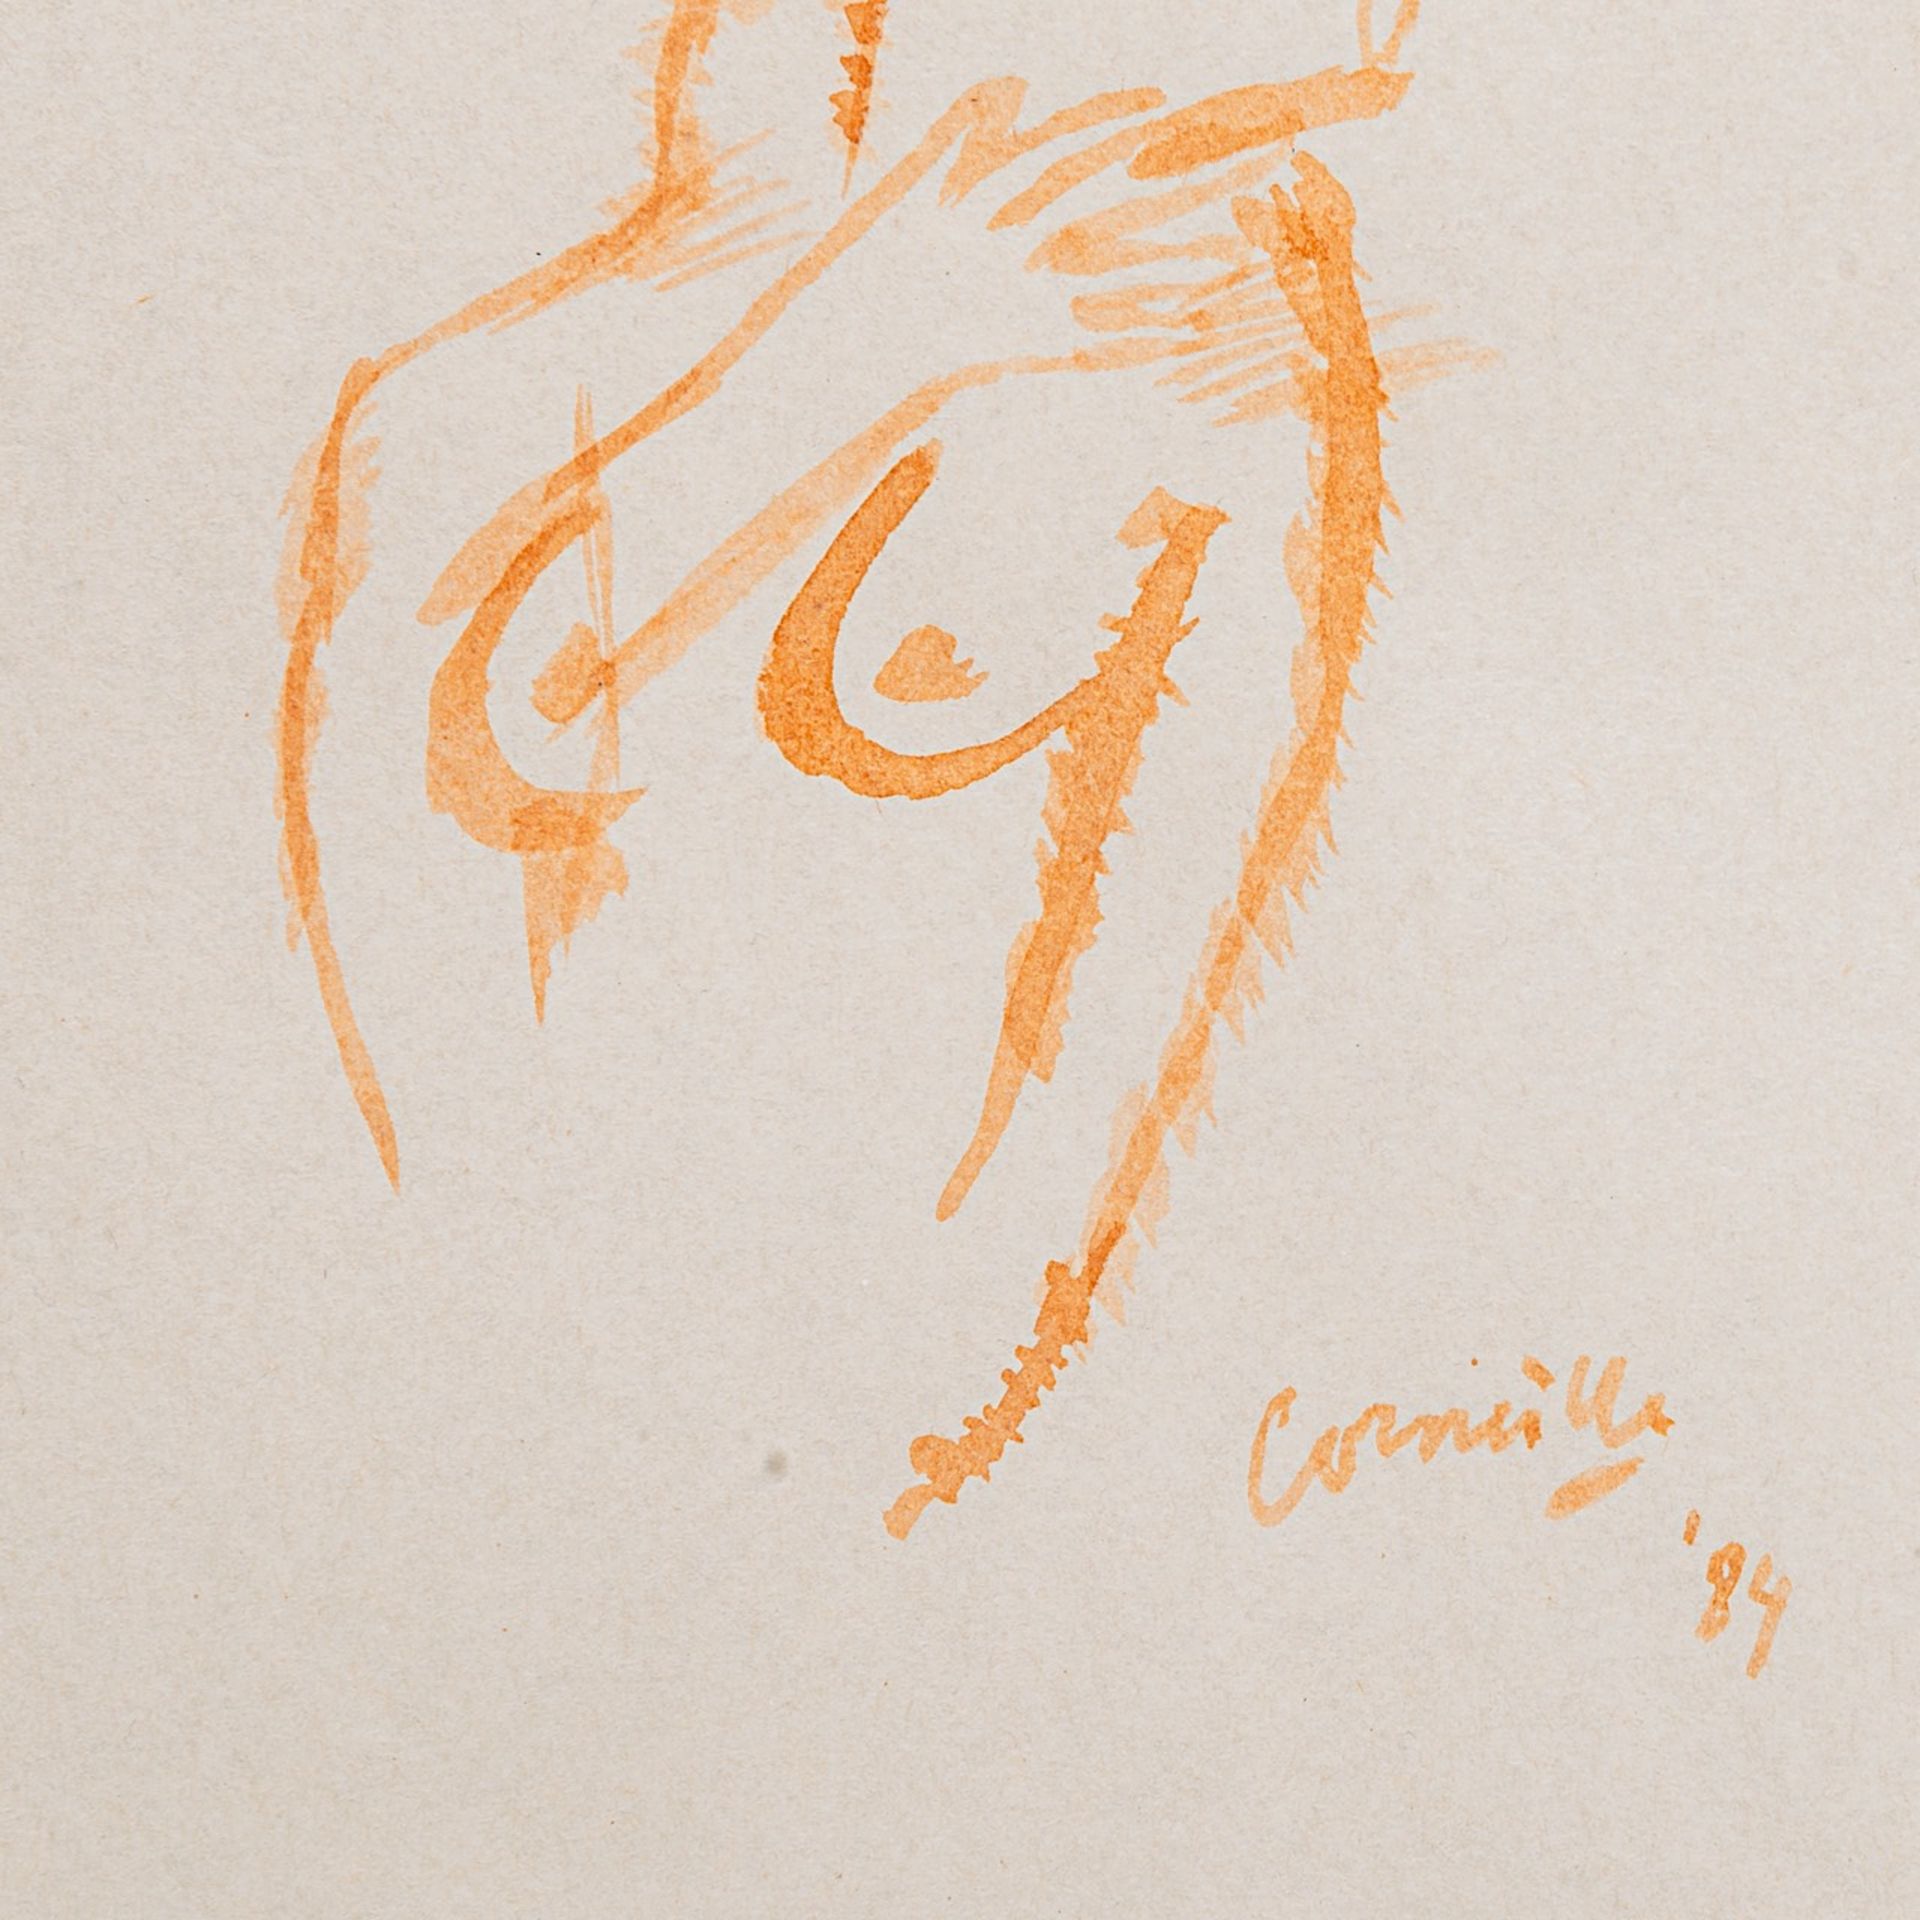 Corneille (1922-2010), 'Lubania', 1984, red watercolour drawing 28 x 20 cm. (11.0 x 7.8 in.), Frame: - Image 5 of 5